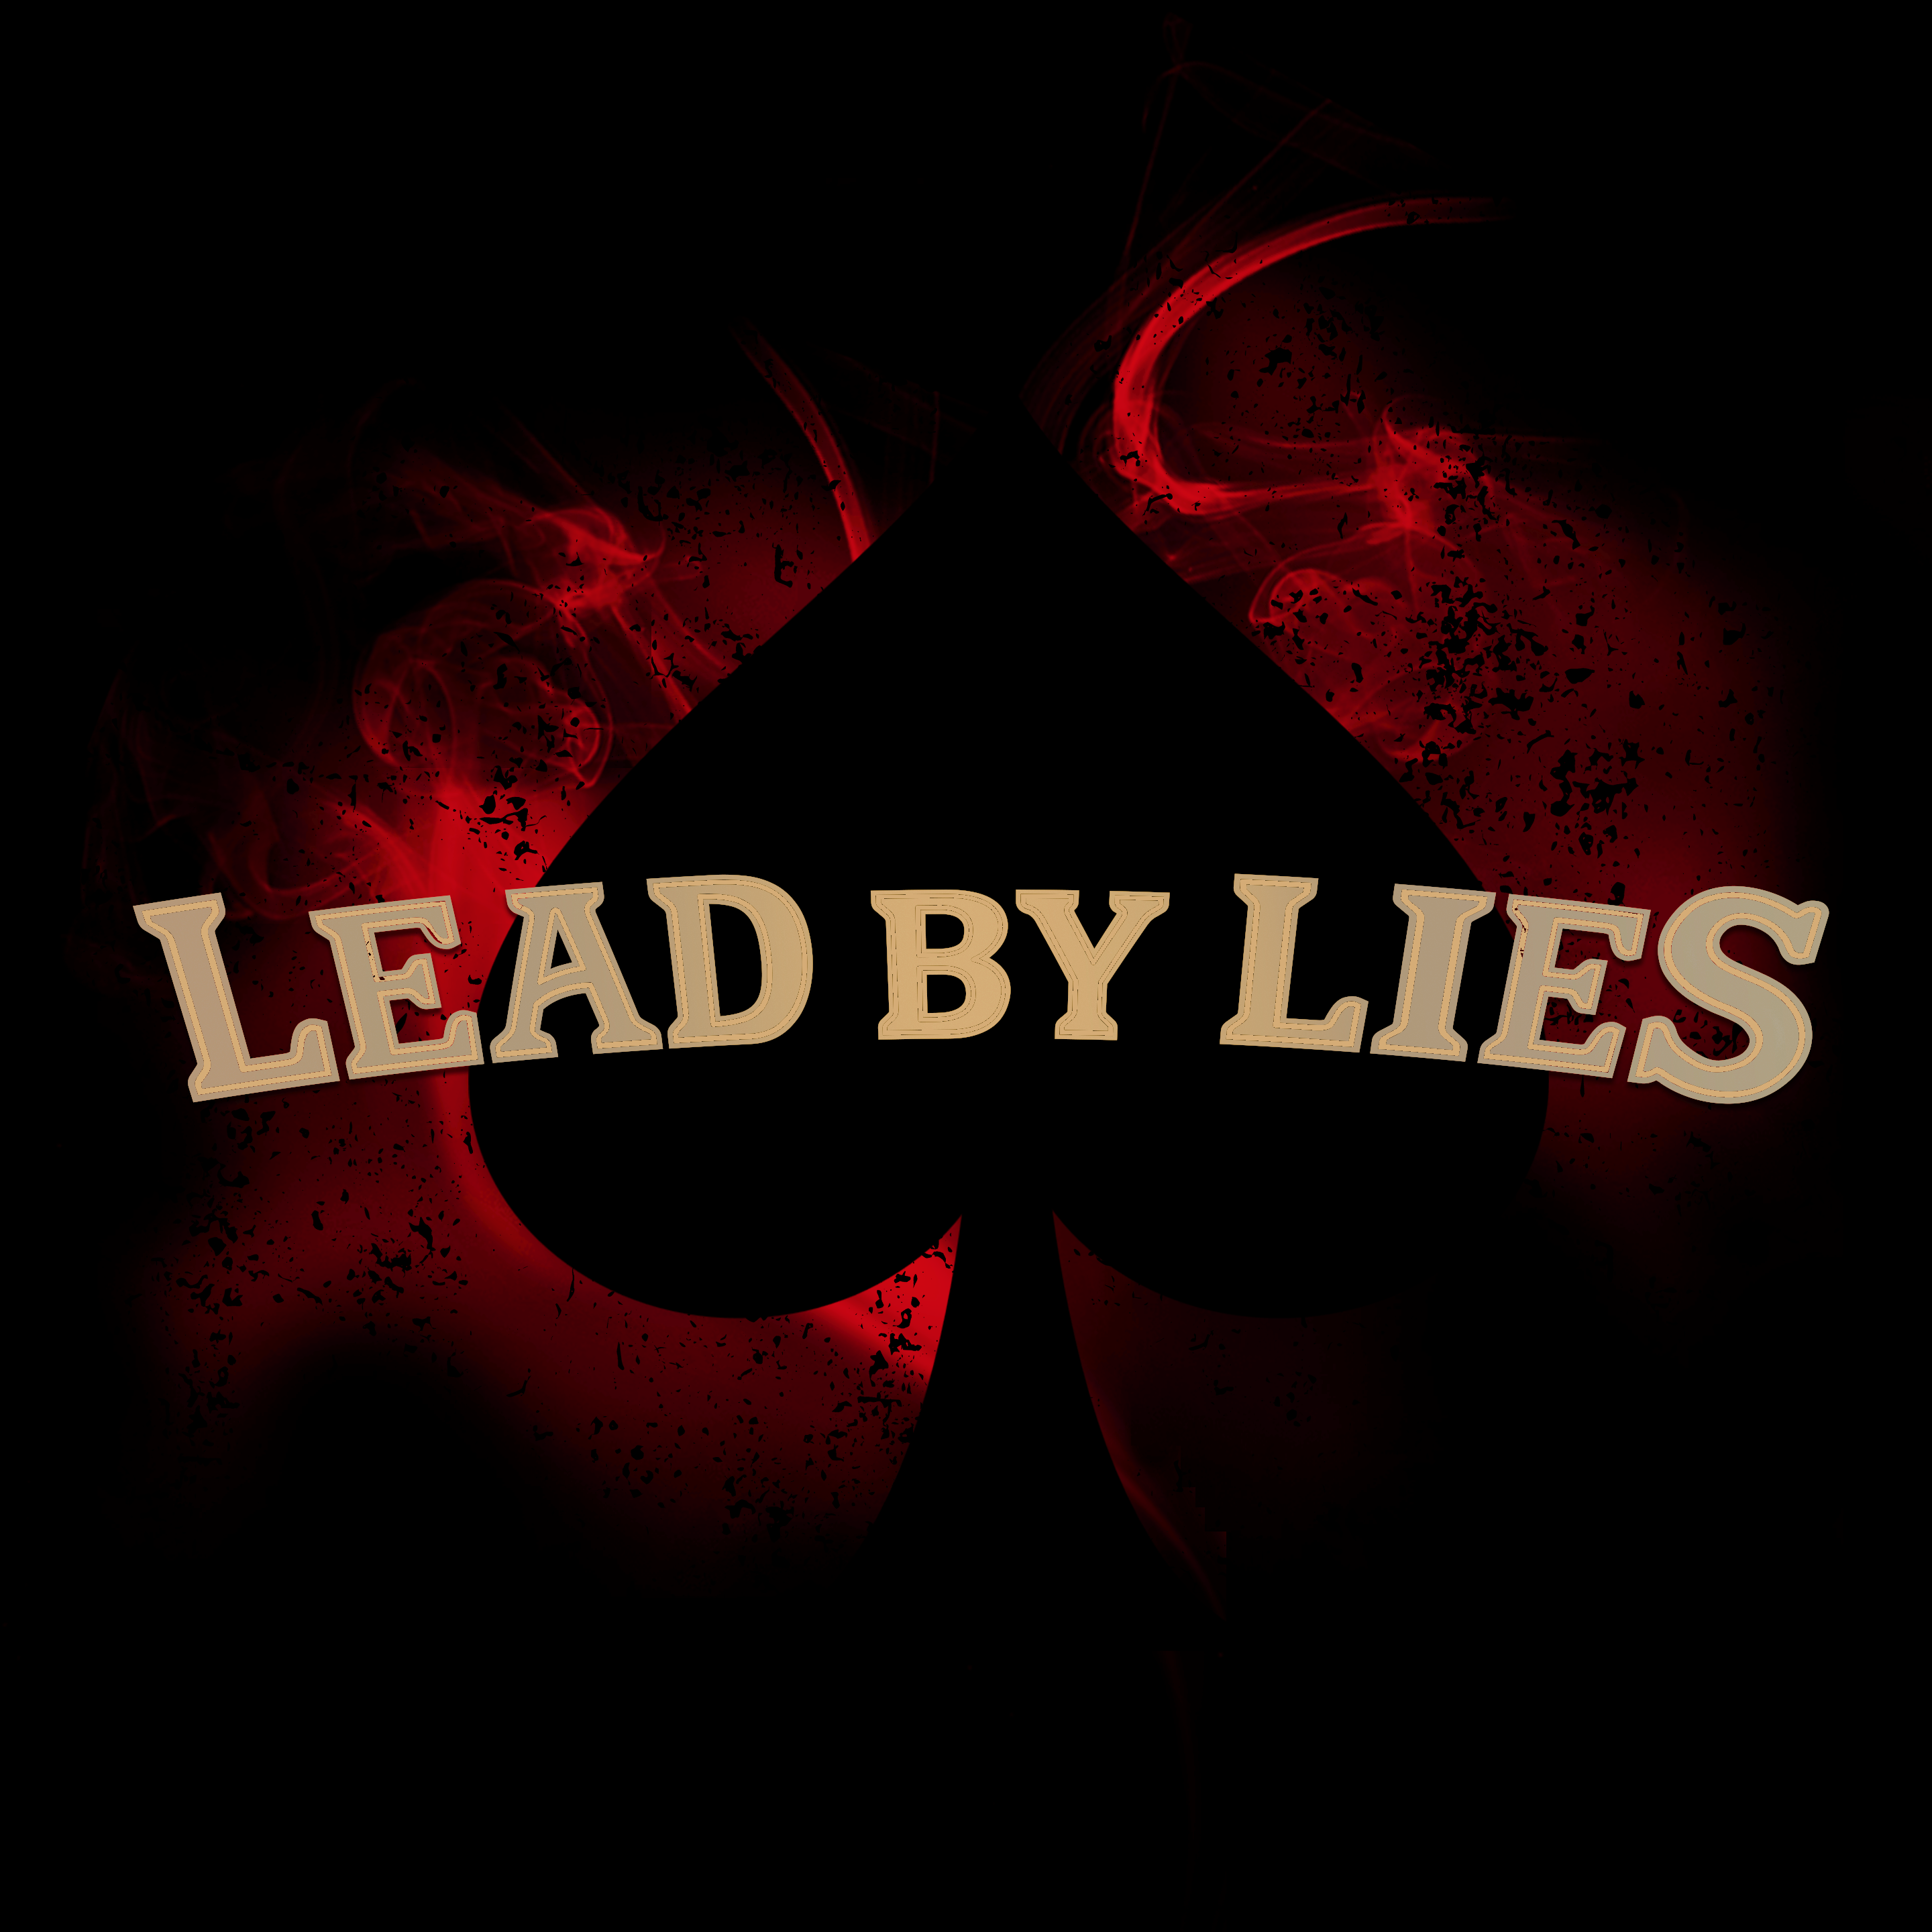 Lead by Lies